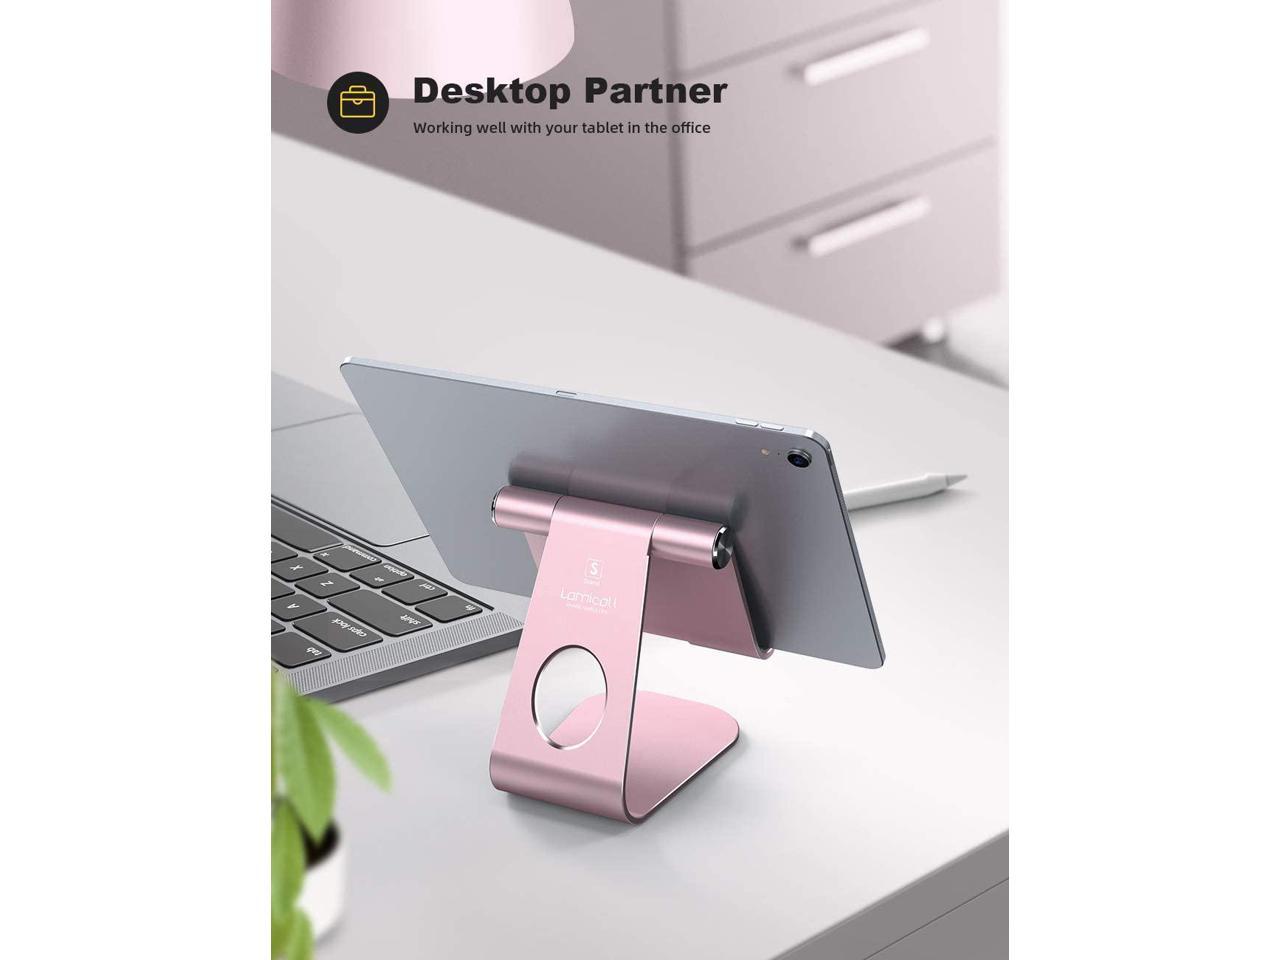 Nexus Tablet Stand Adjustable 4-13 inch E-Reader Lamicall Tablet Stand : Desktop Stand Holder Dock Compatible with New iPad 2018 Pro 9.7 Kindle Air Mini 2 3 4 10.5 Tab - Gray Accessories